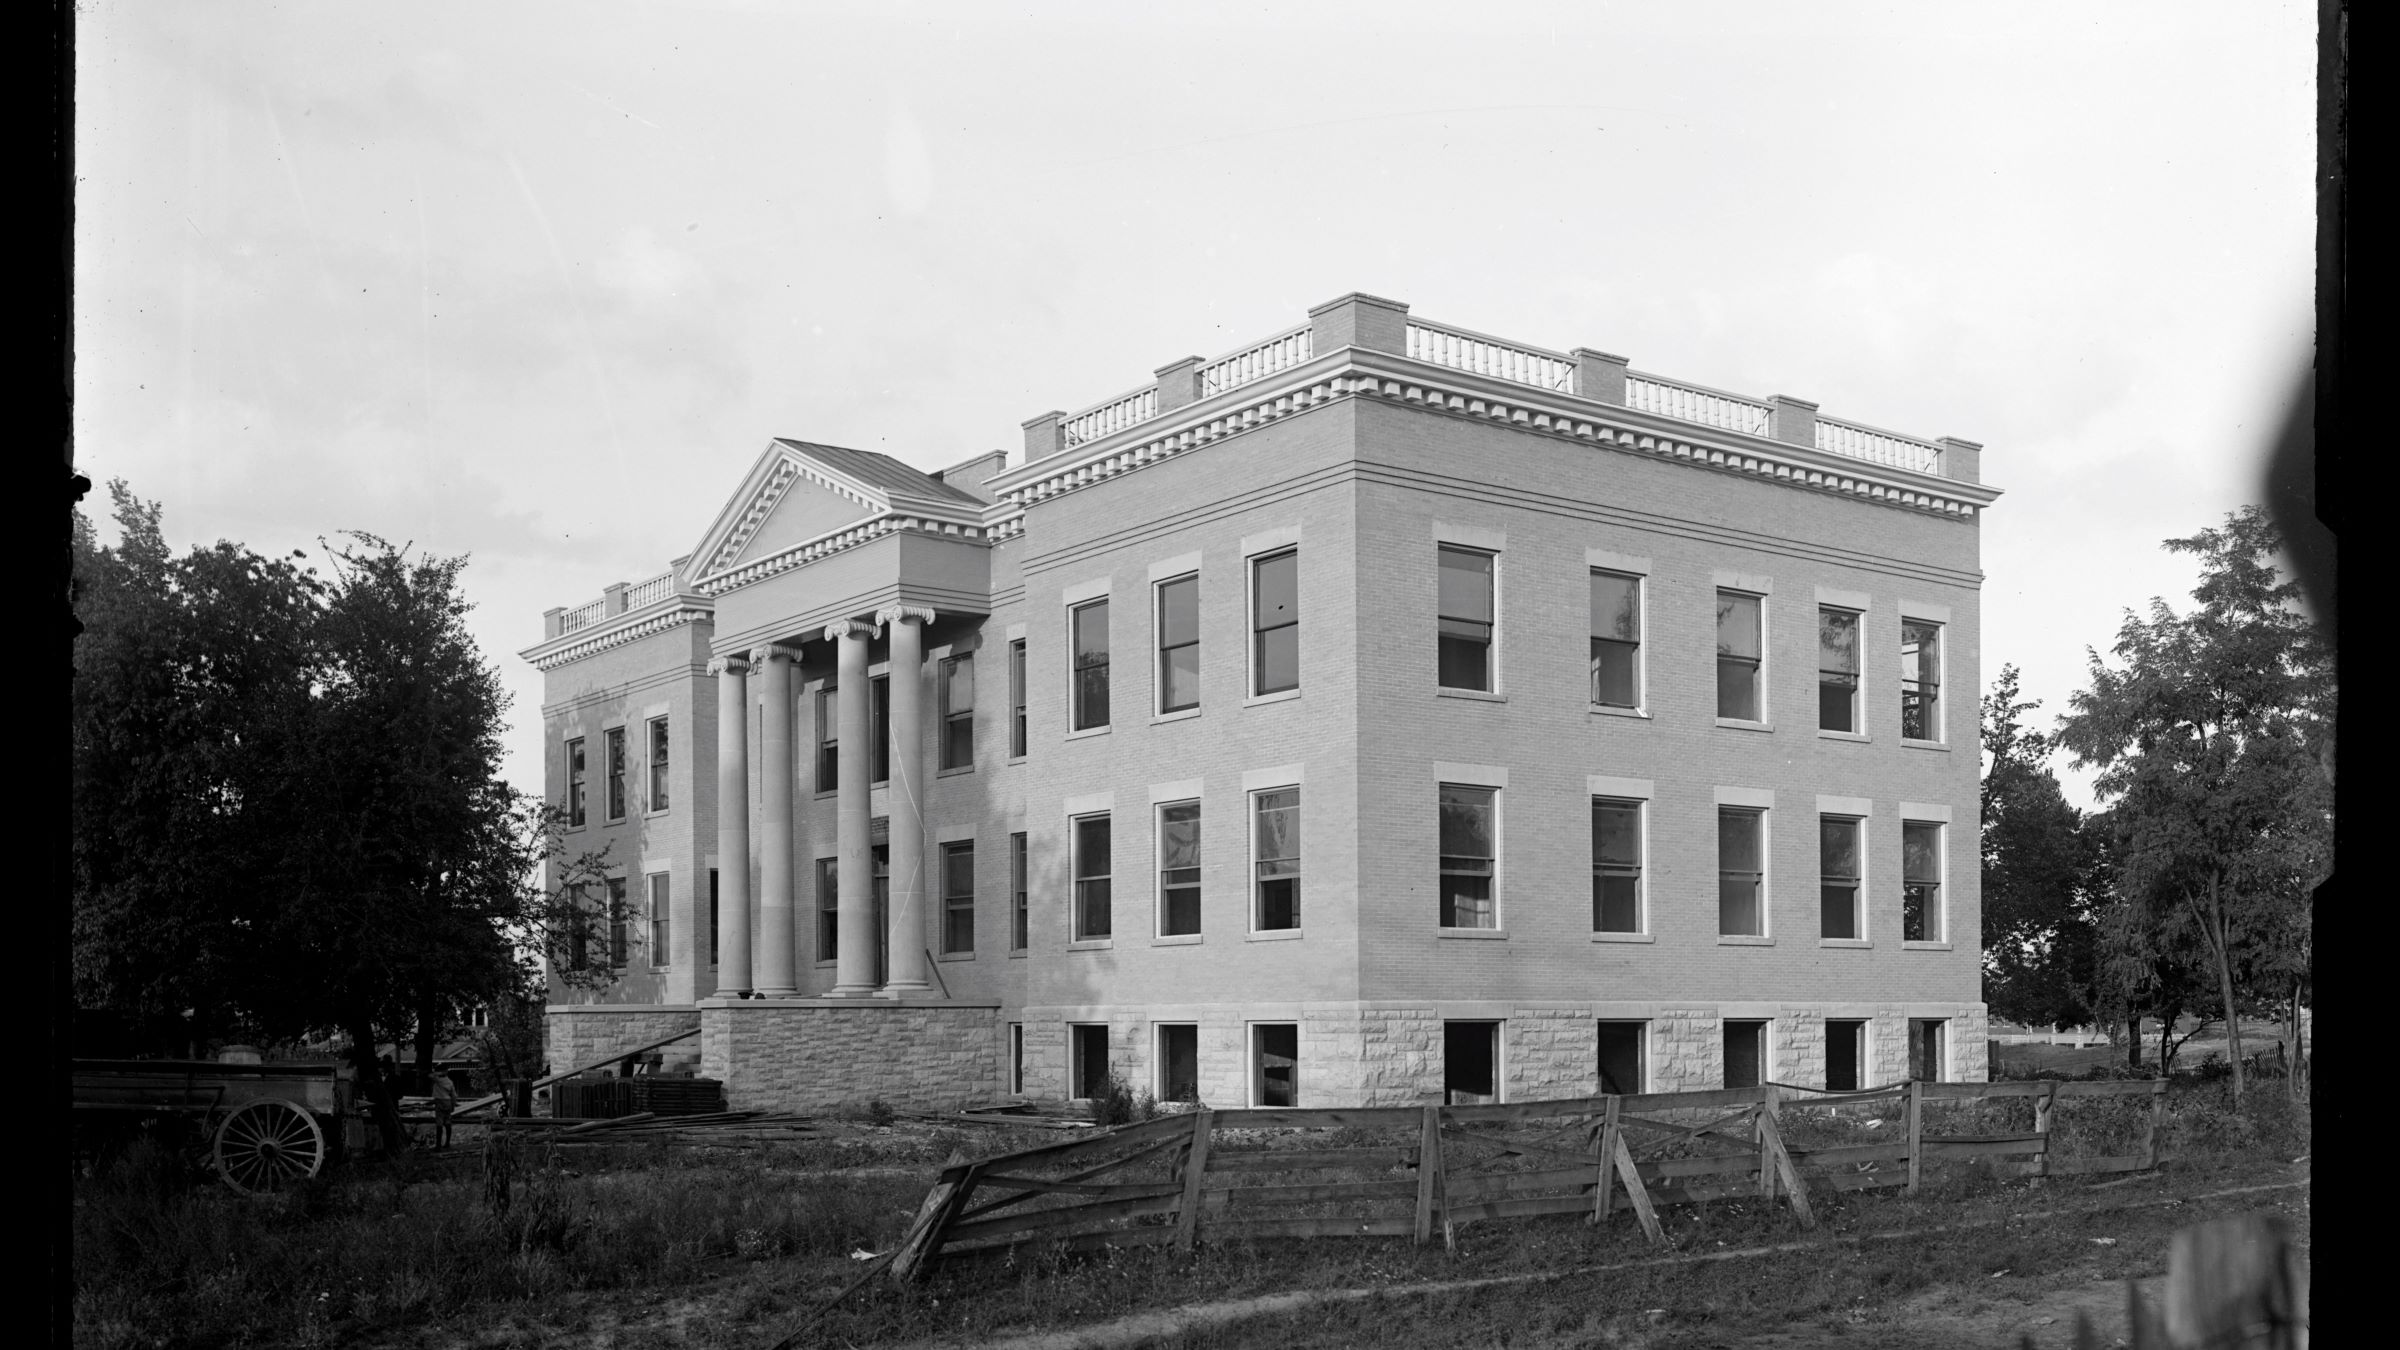 Scovell Hall was originally constructed in 1903, named after Melville Amasa Scovell who was the first director of the Experiment Station from 1885-1911 and the college's first dean in 1910.